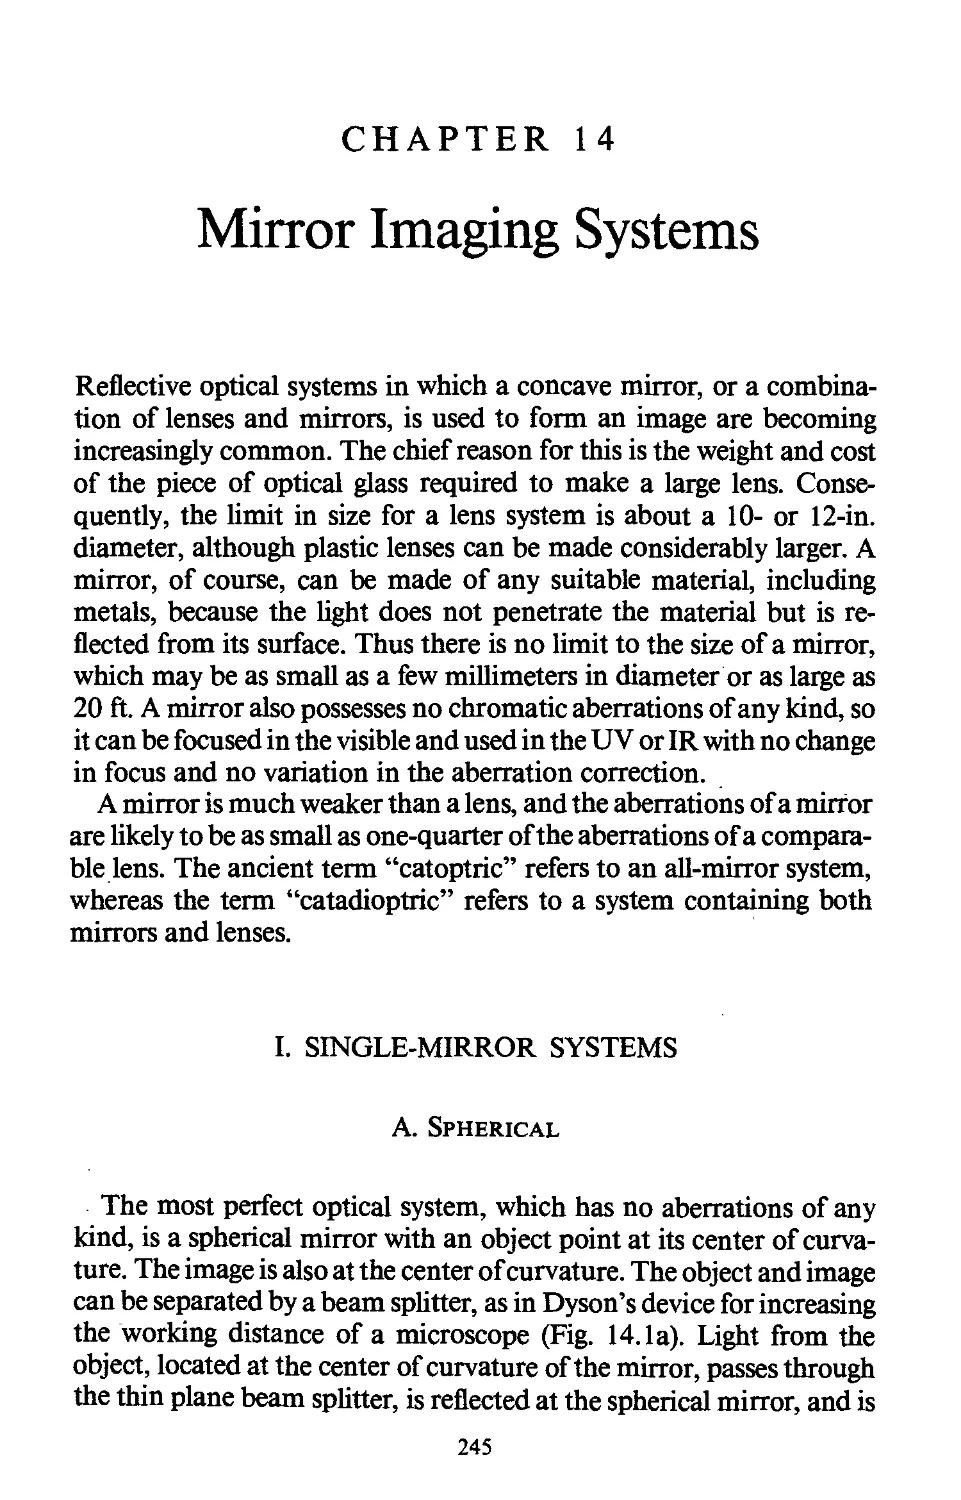 14. MIRROR IMAGING SYSTEMS